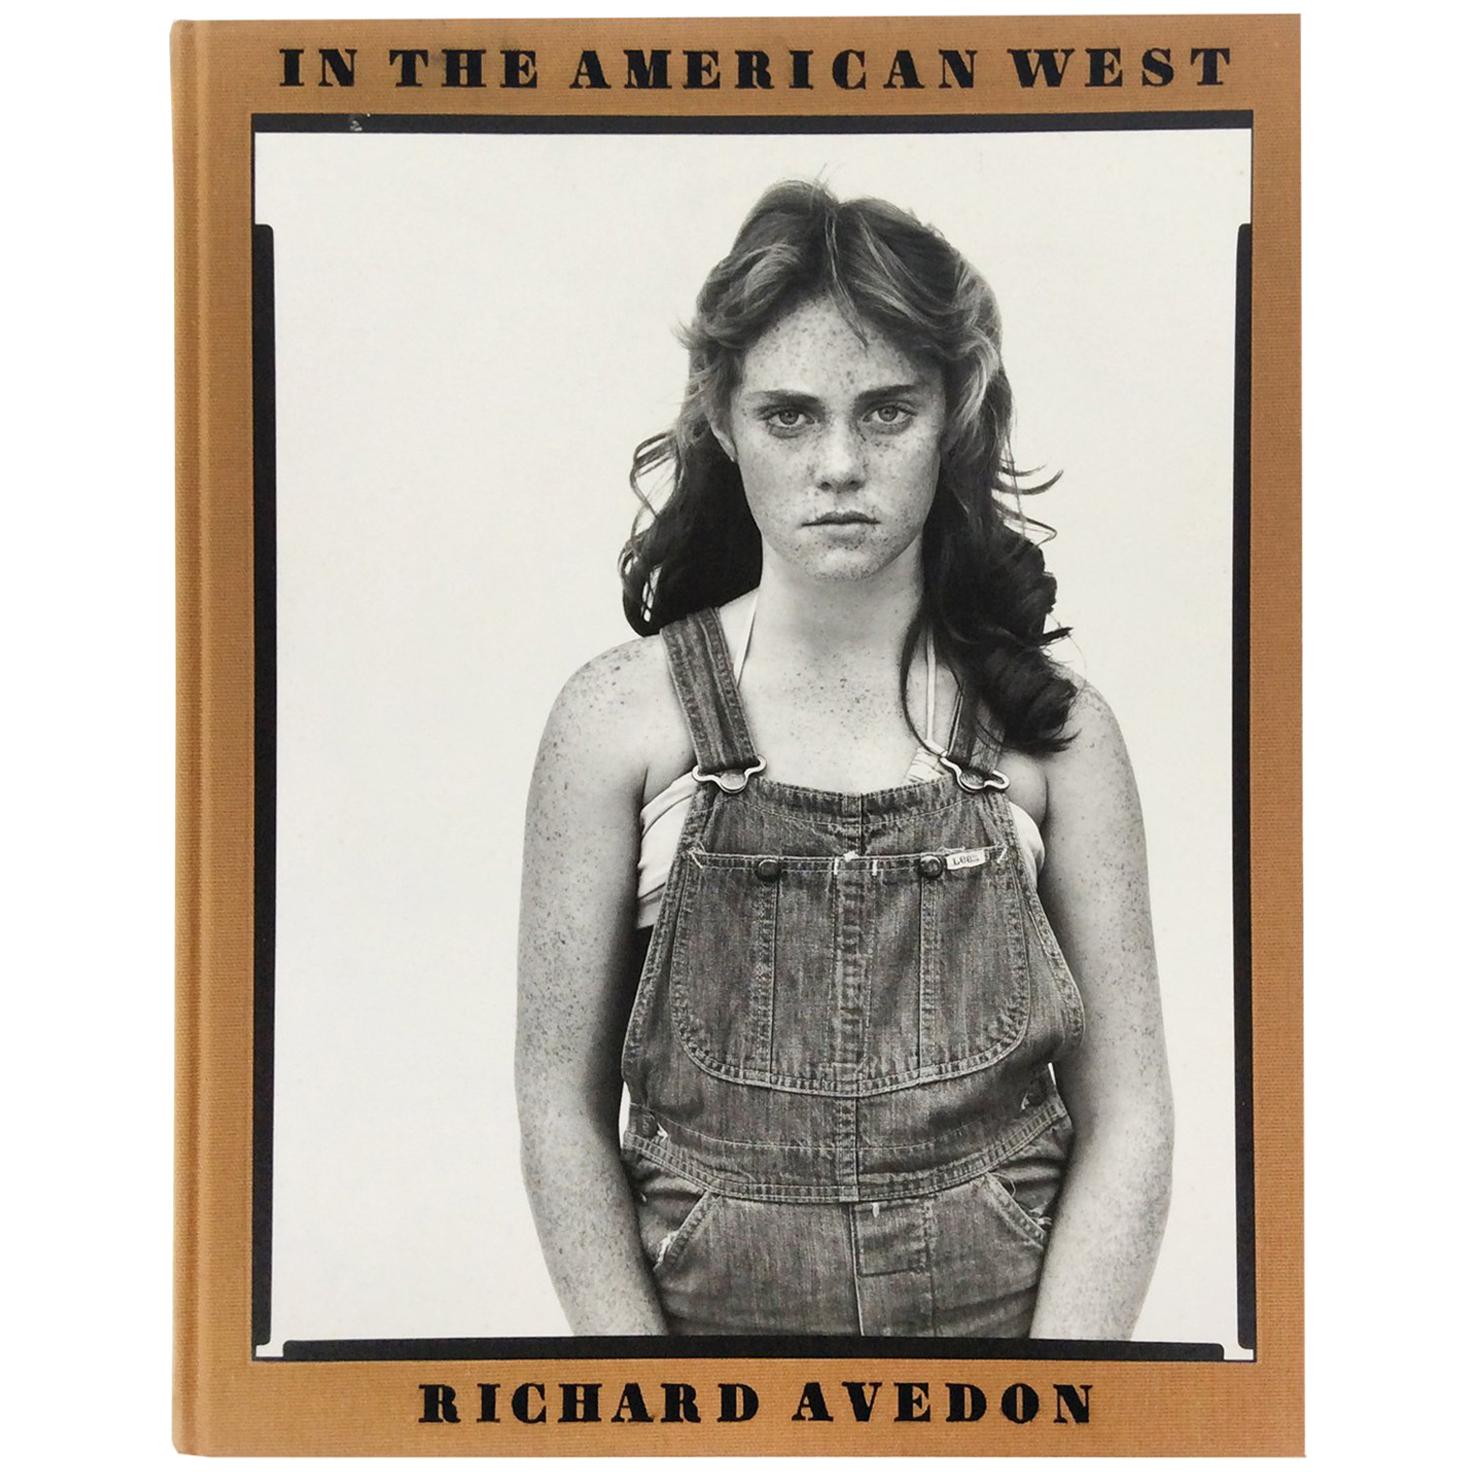 Richard Avedon Photography Book, "In the American West"